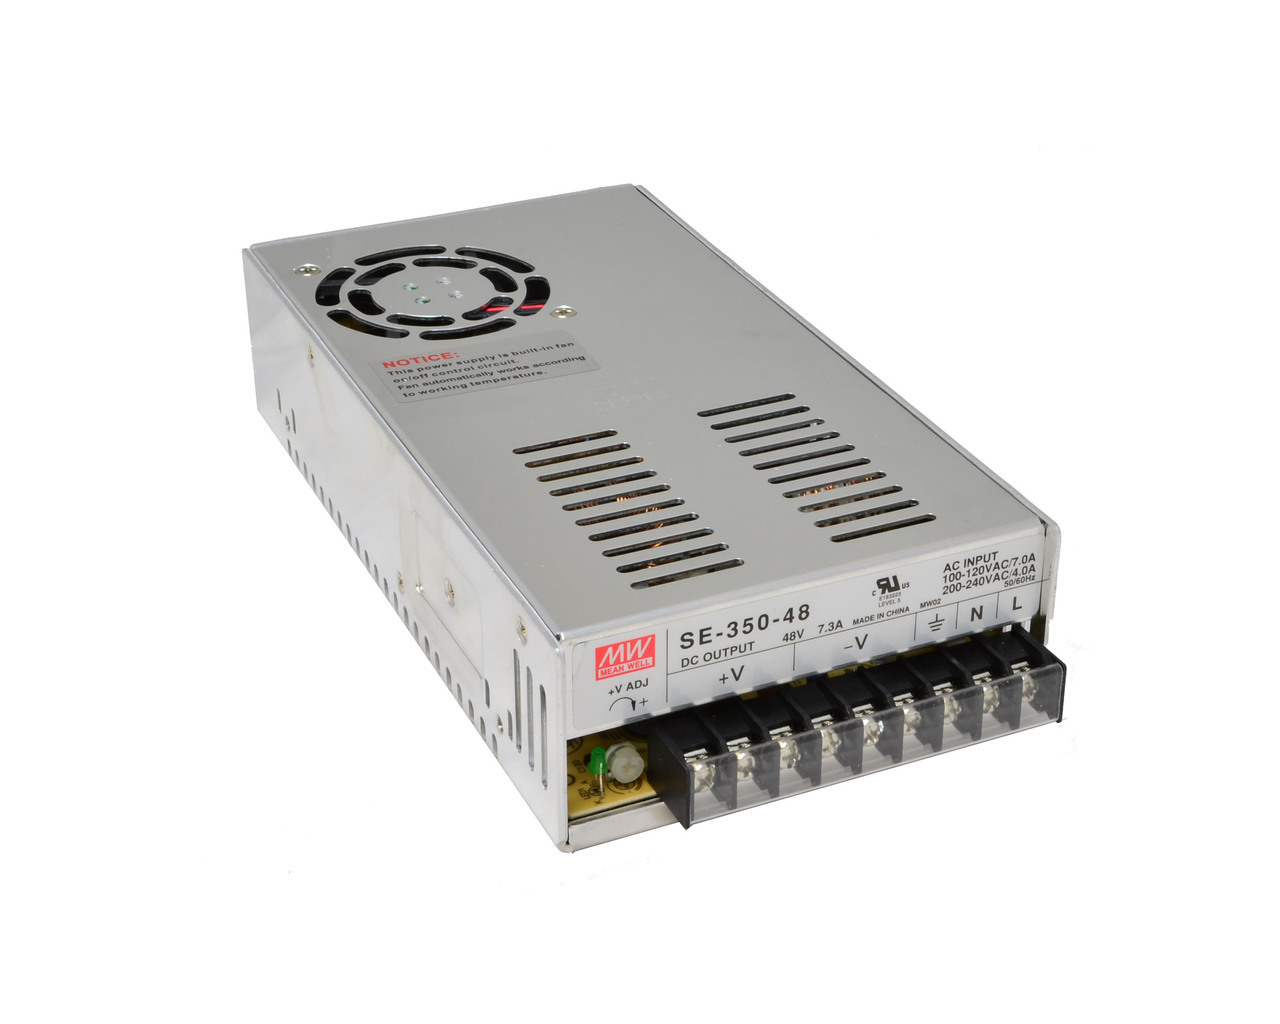  Meanwell / Power Supply / SE-350-24